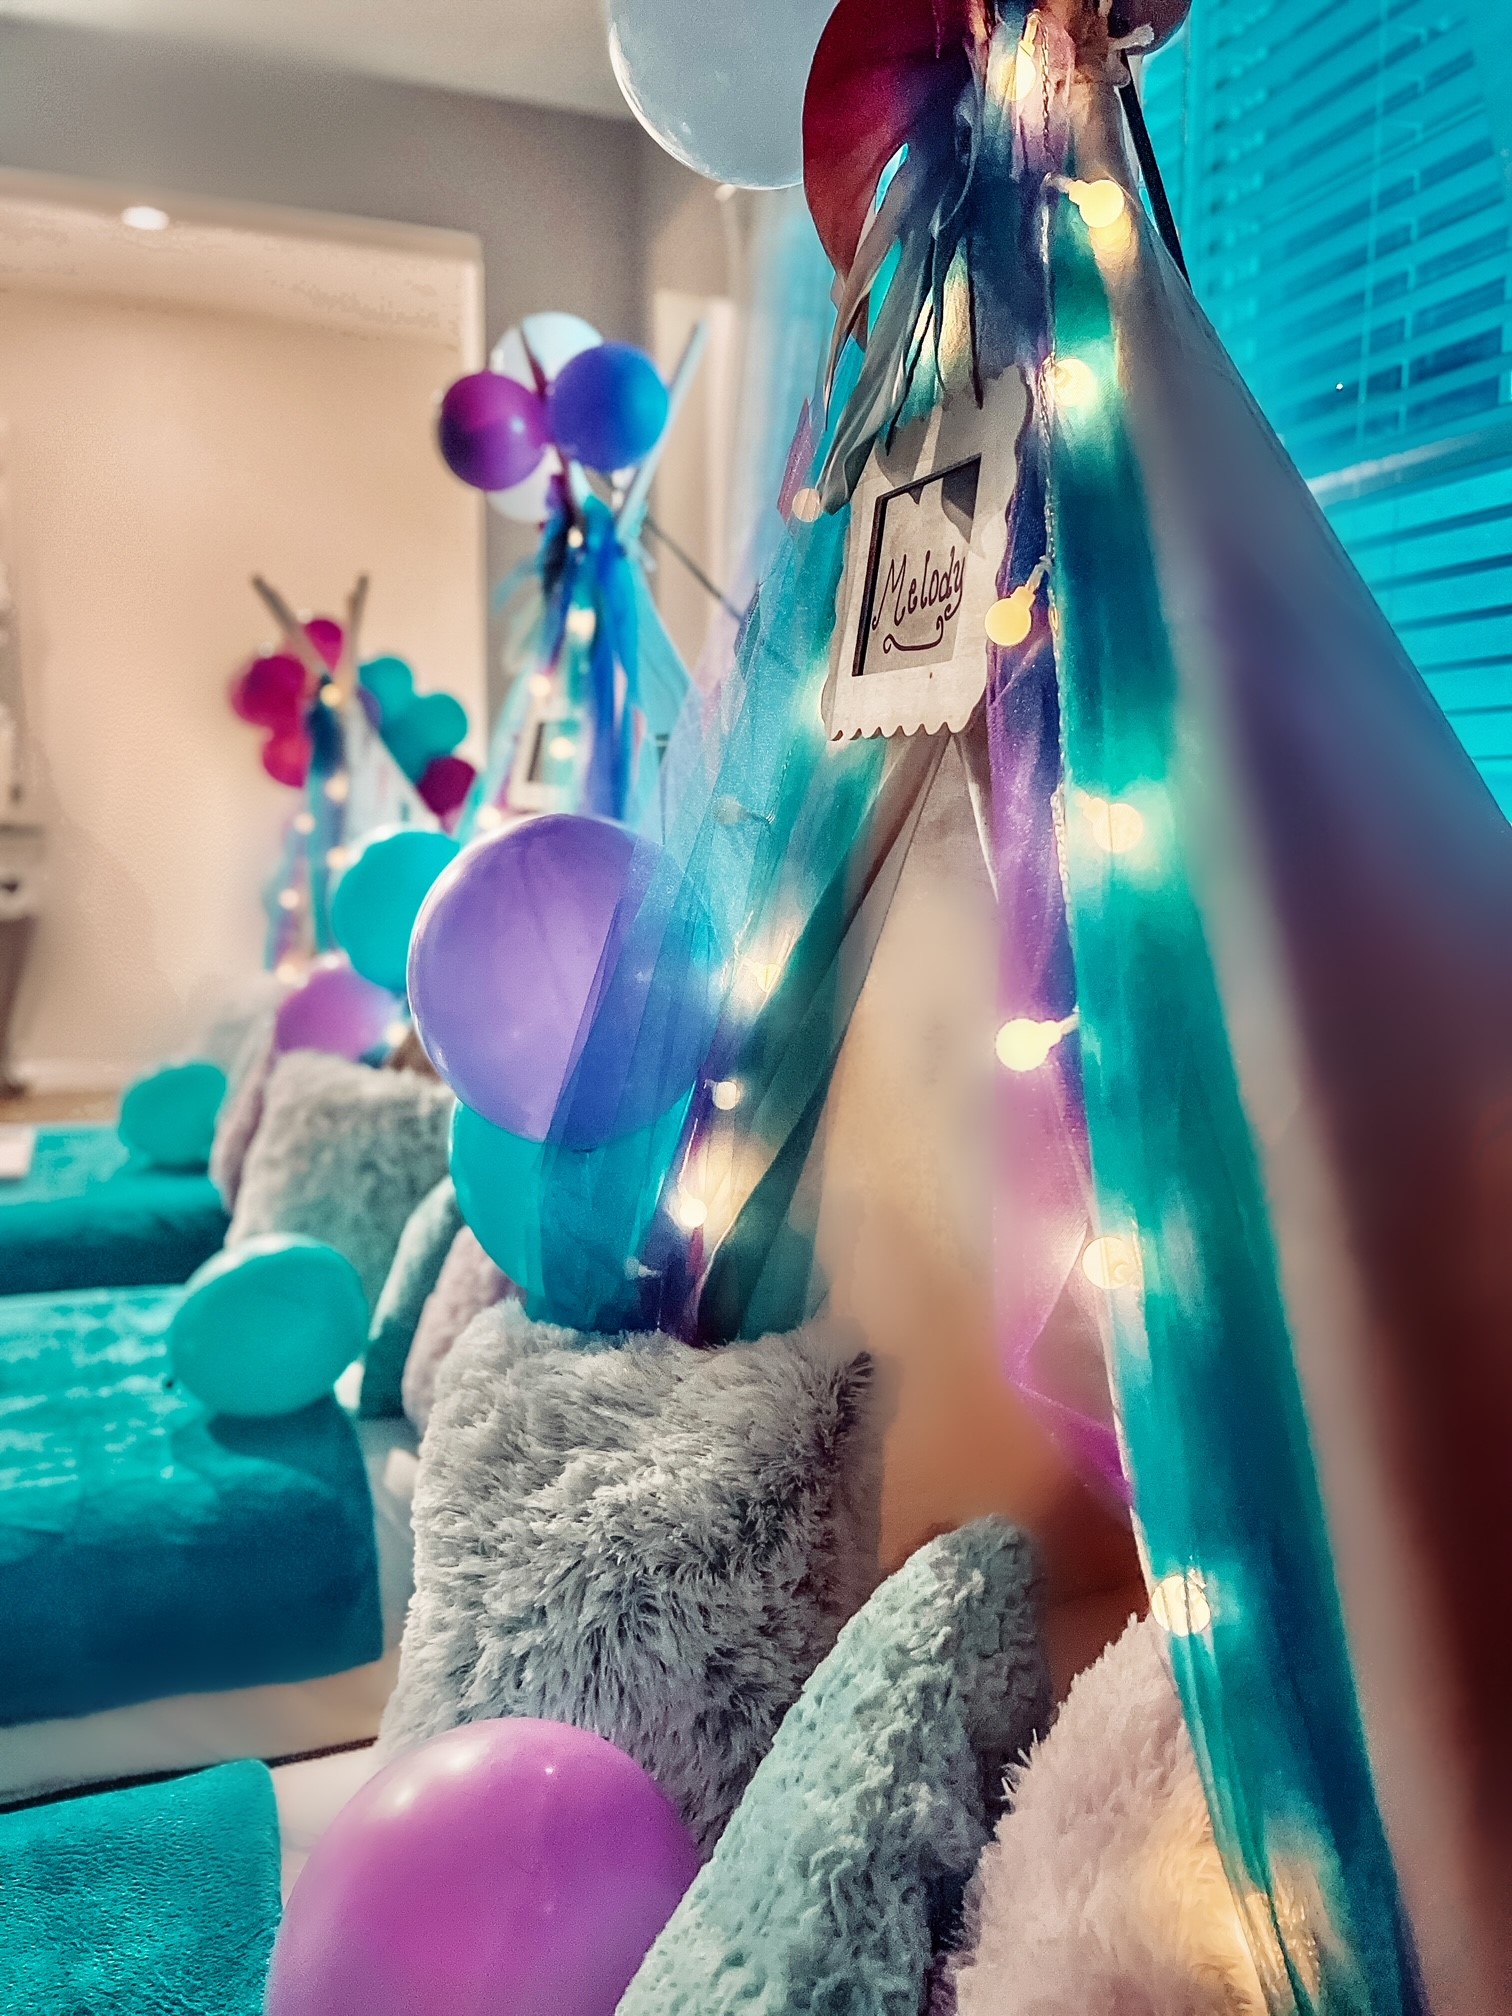 Purple and Teal embellished teepee themed tents with fairy lights and plush decorative pillows fairy lights